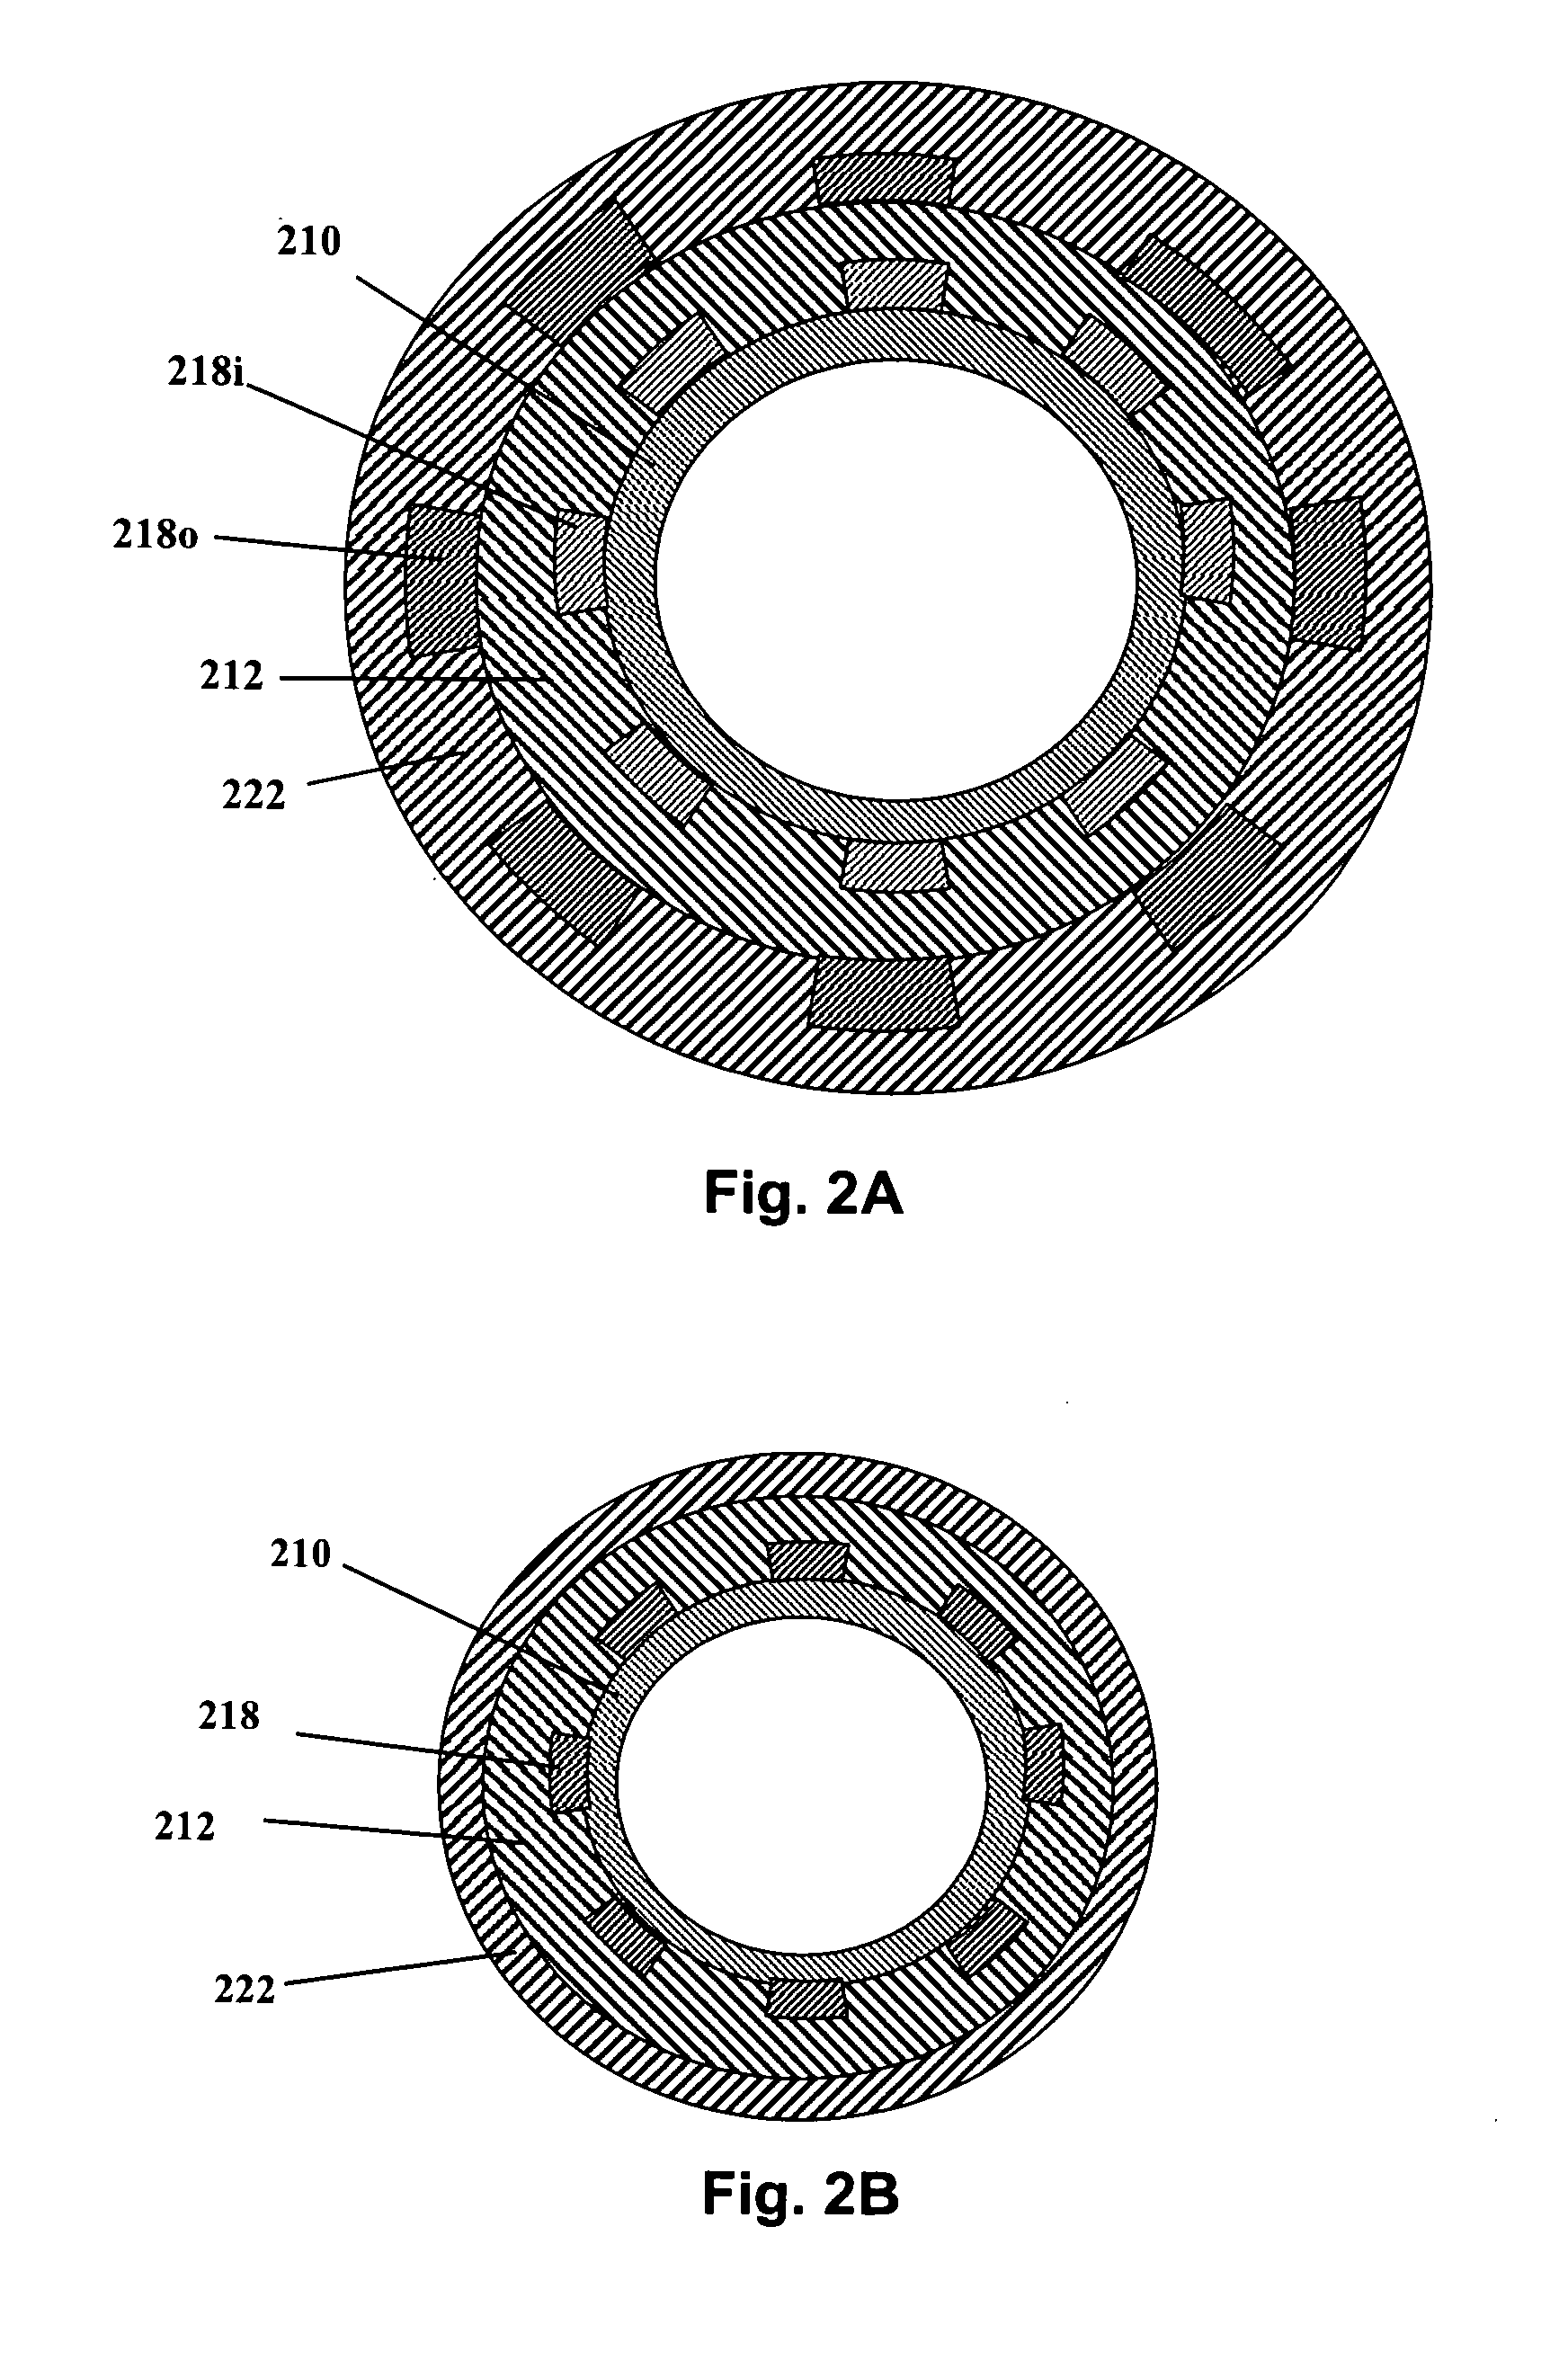 Internal medical devices for delivery of therapeutic agent in conjunction with a source of electrical power